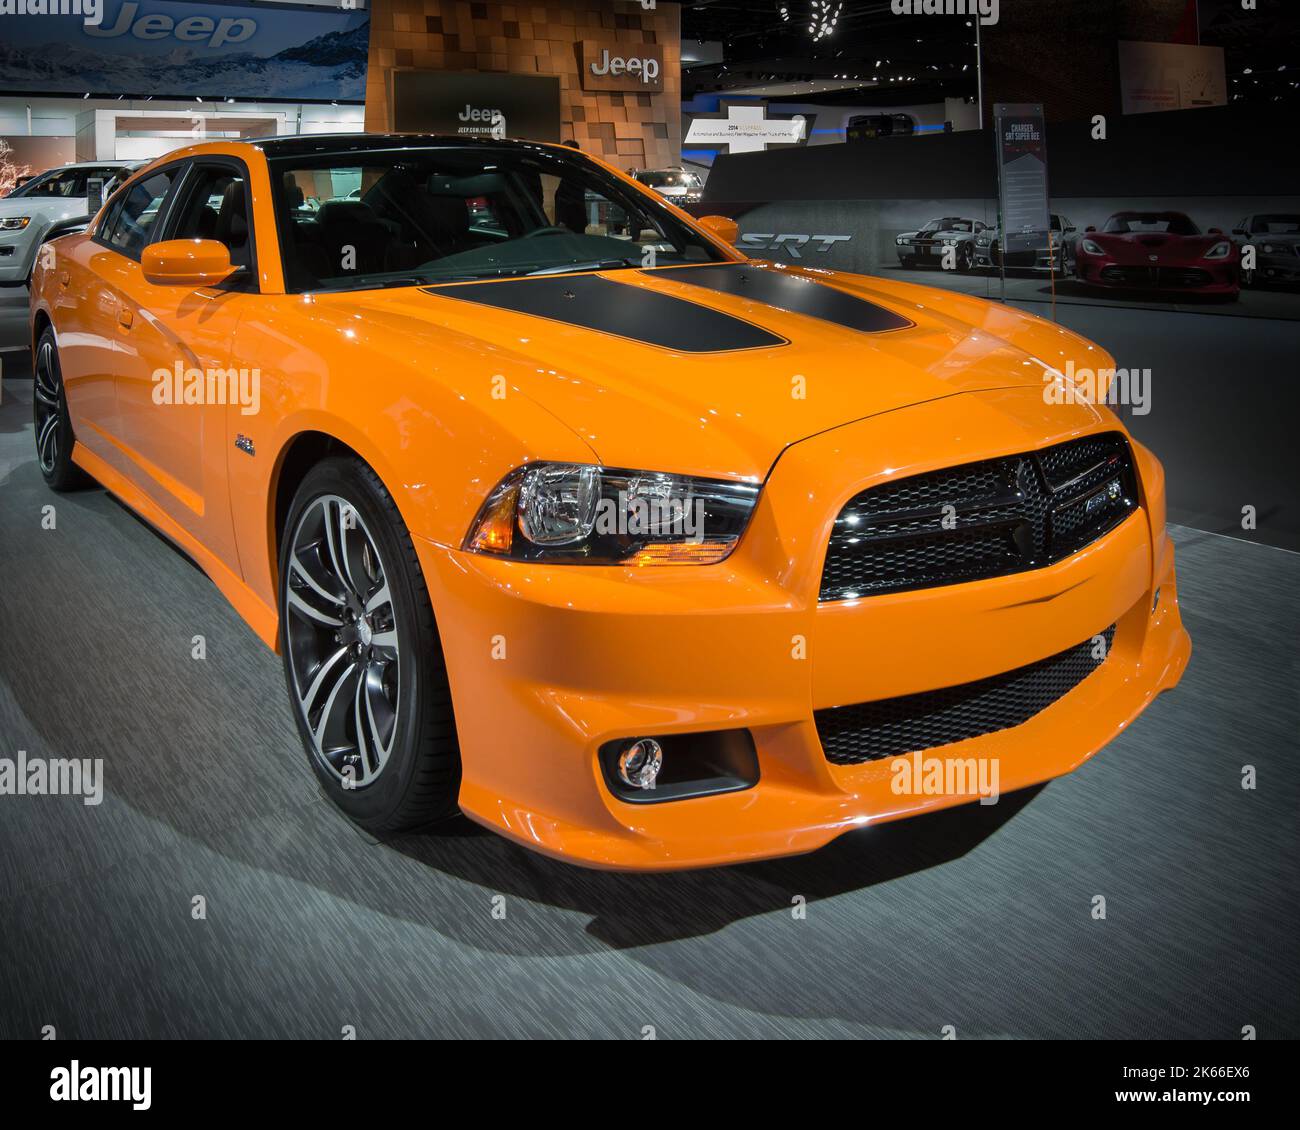 DETROIT, MI/USA - JANUARY 15: A 2014 Dodge Charger Super Bee car at the North American International Auto Show (NAIAS). Stock Photo